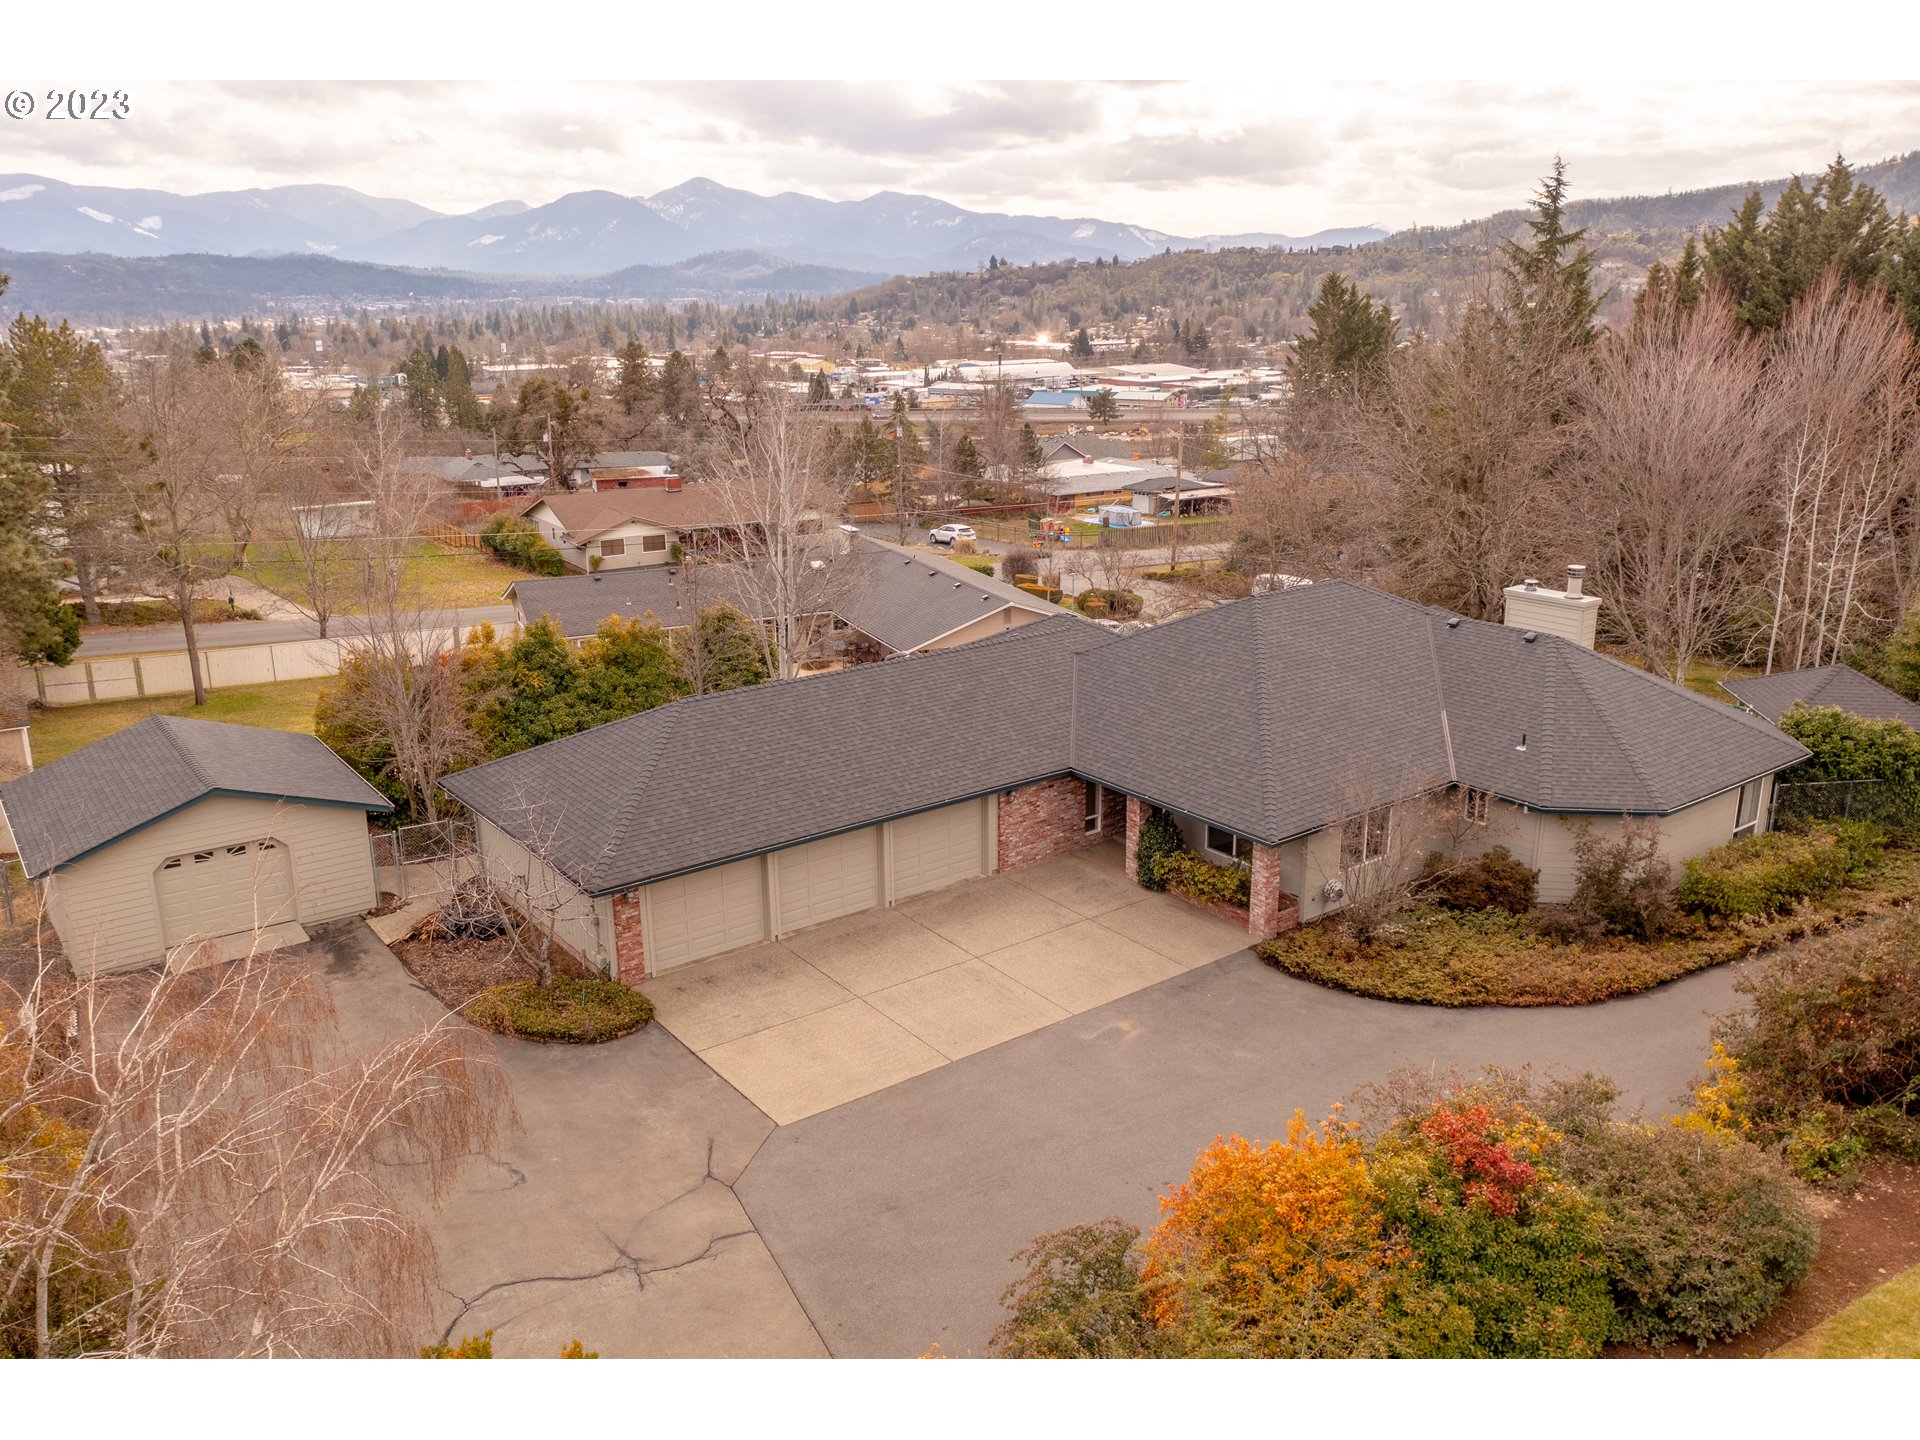 2311 SCOVILLE RD, Grants Pass, OR 